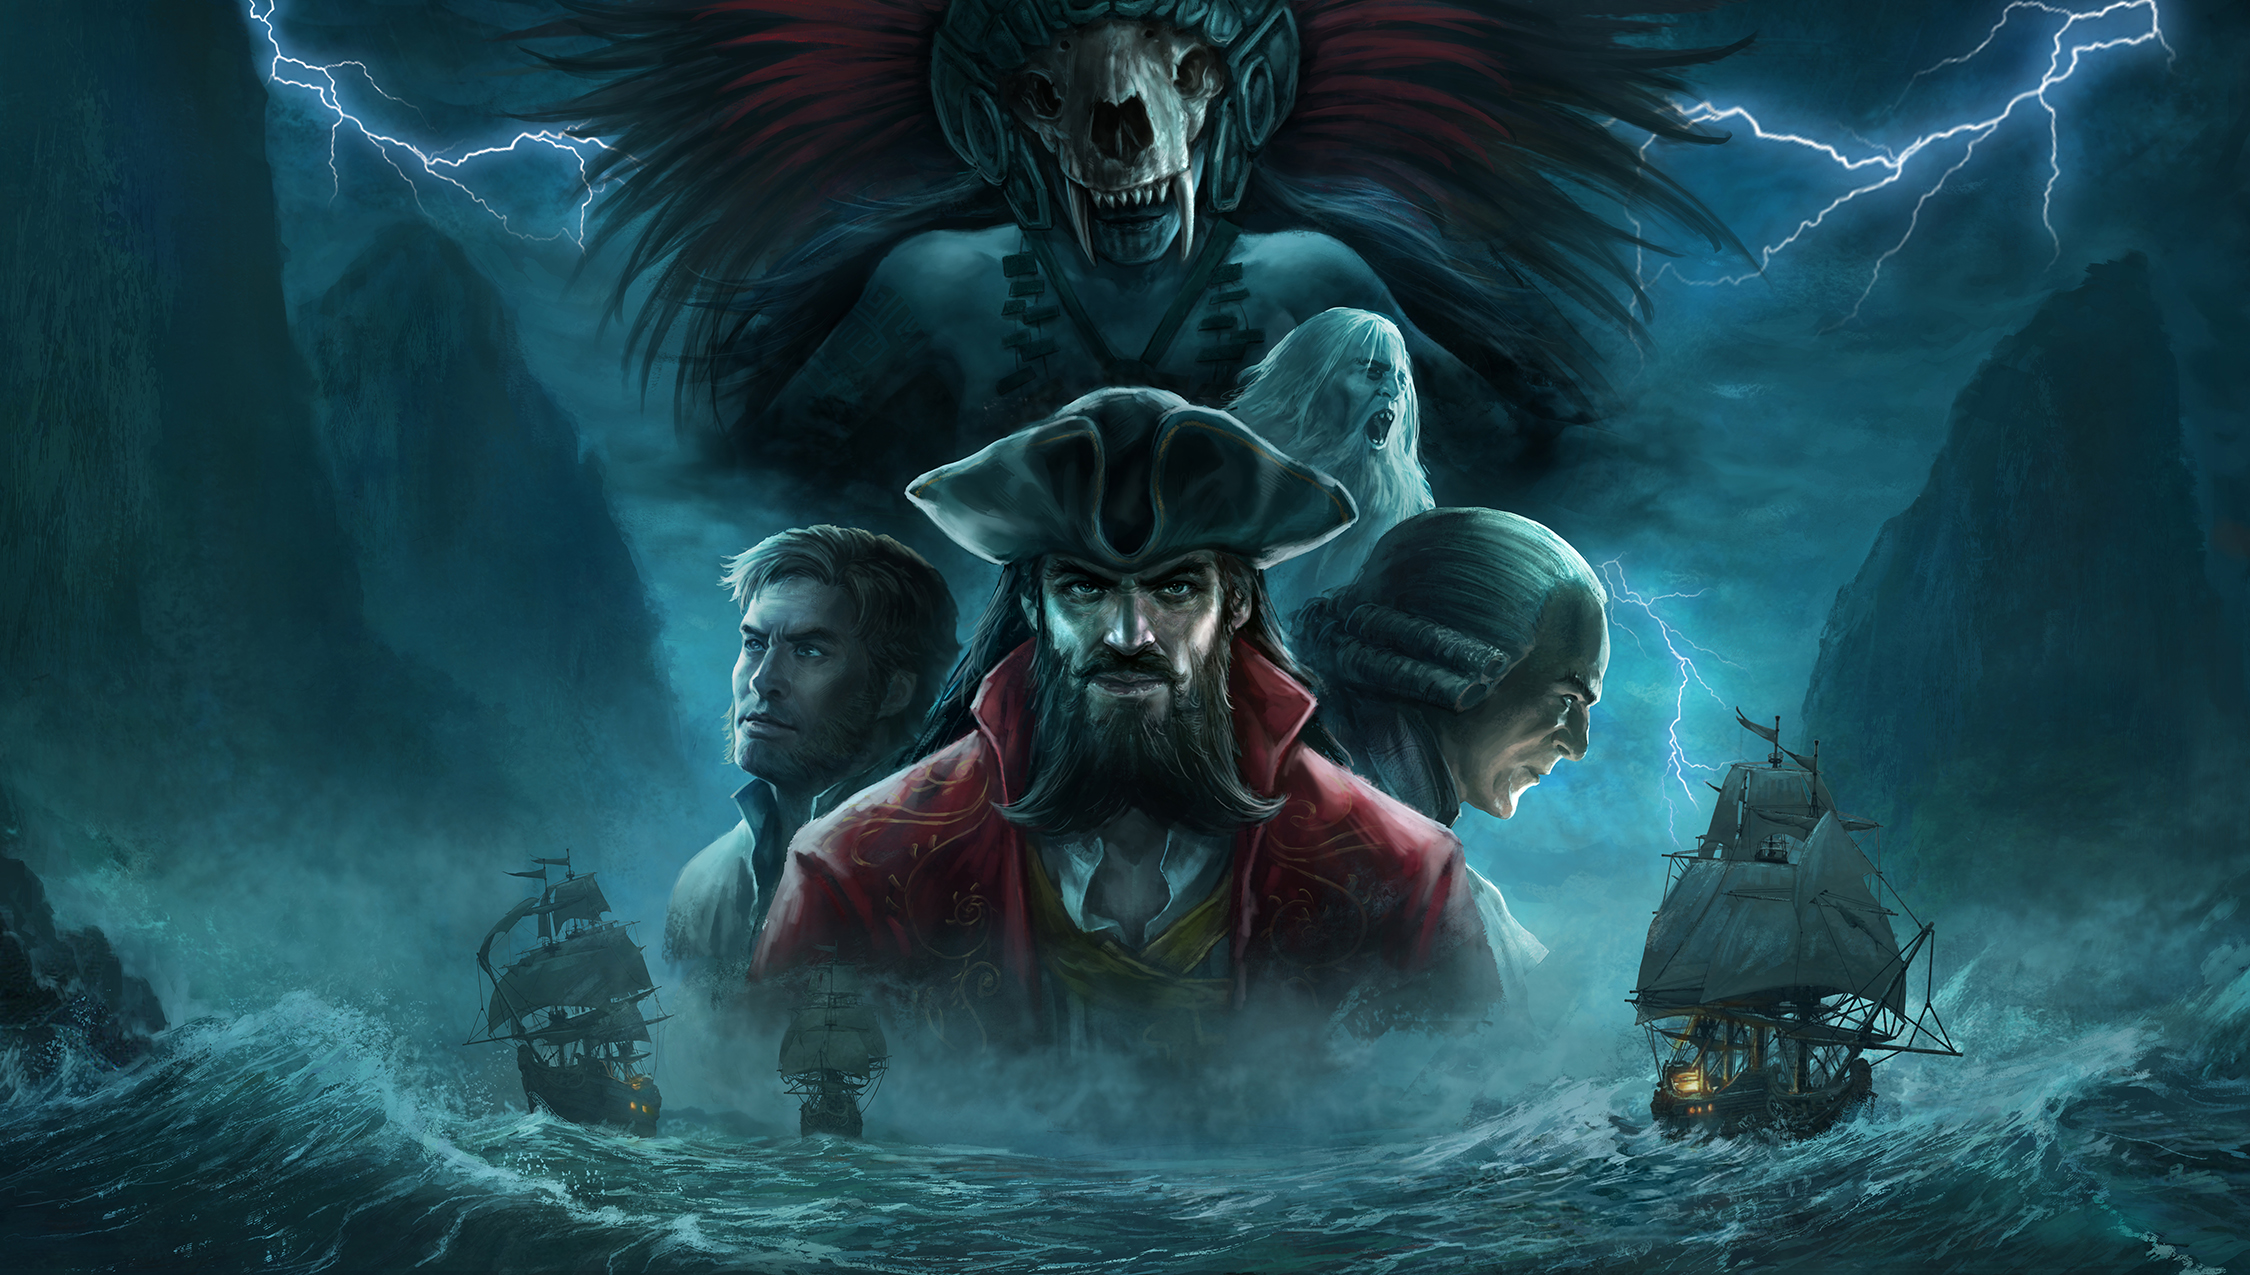  Upcoming pirate RPG wants to break from cliché and show 'what piracy really was' 